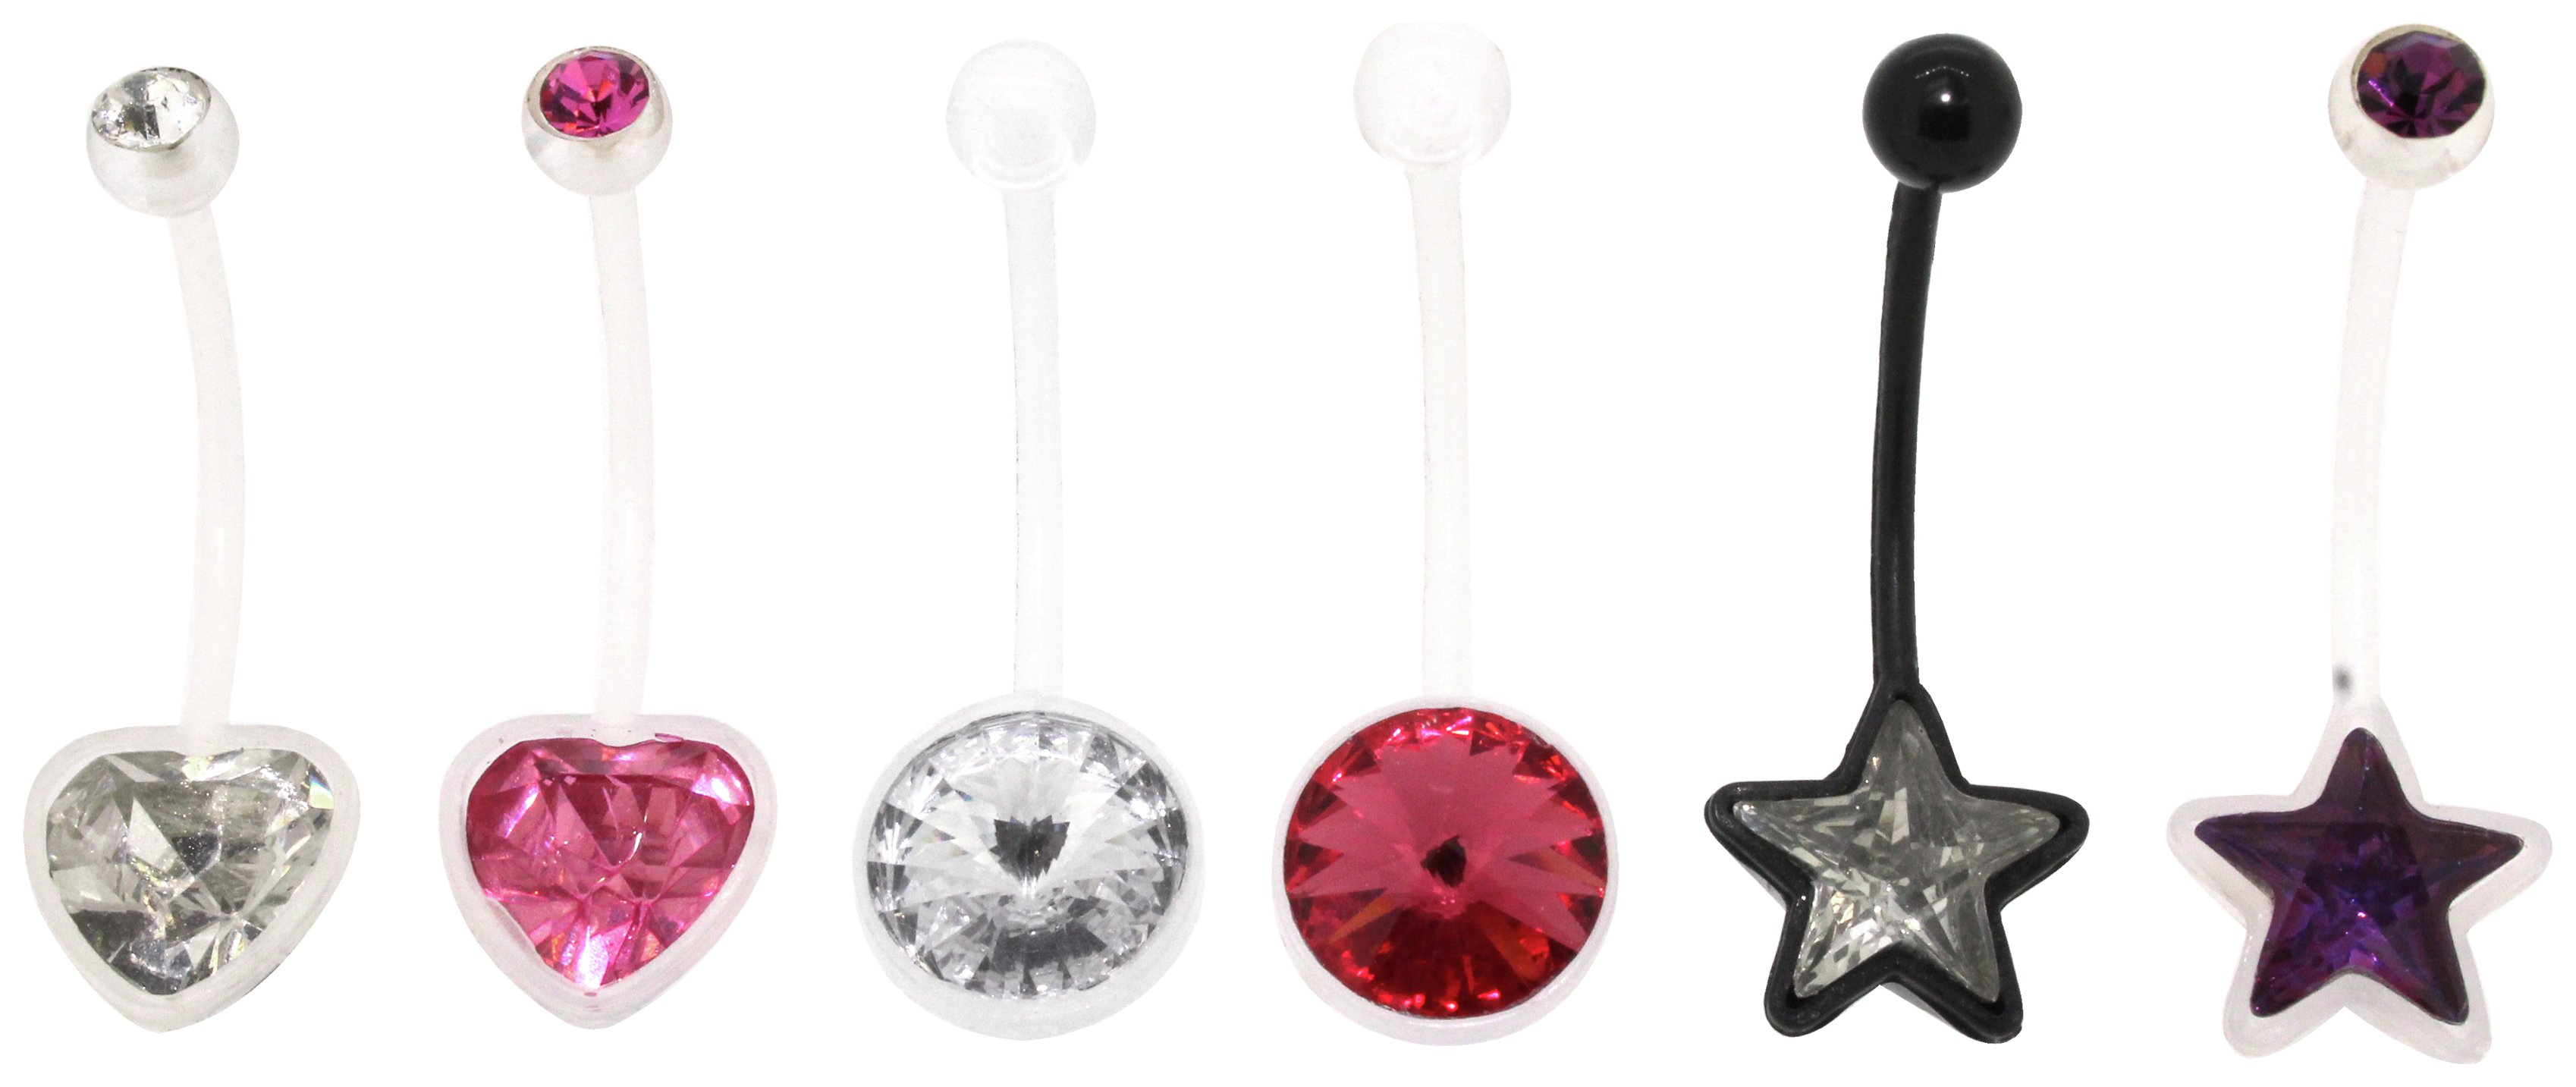 Link Up Stainless Steel Flexible Belly Bars - Set of 6.